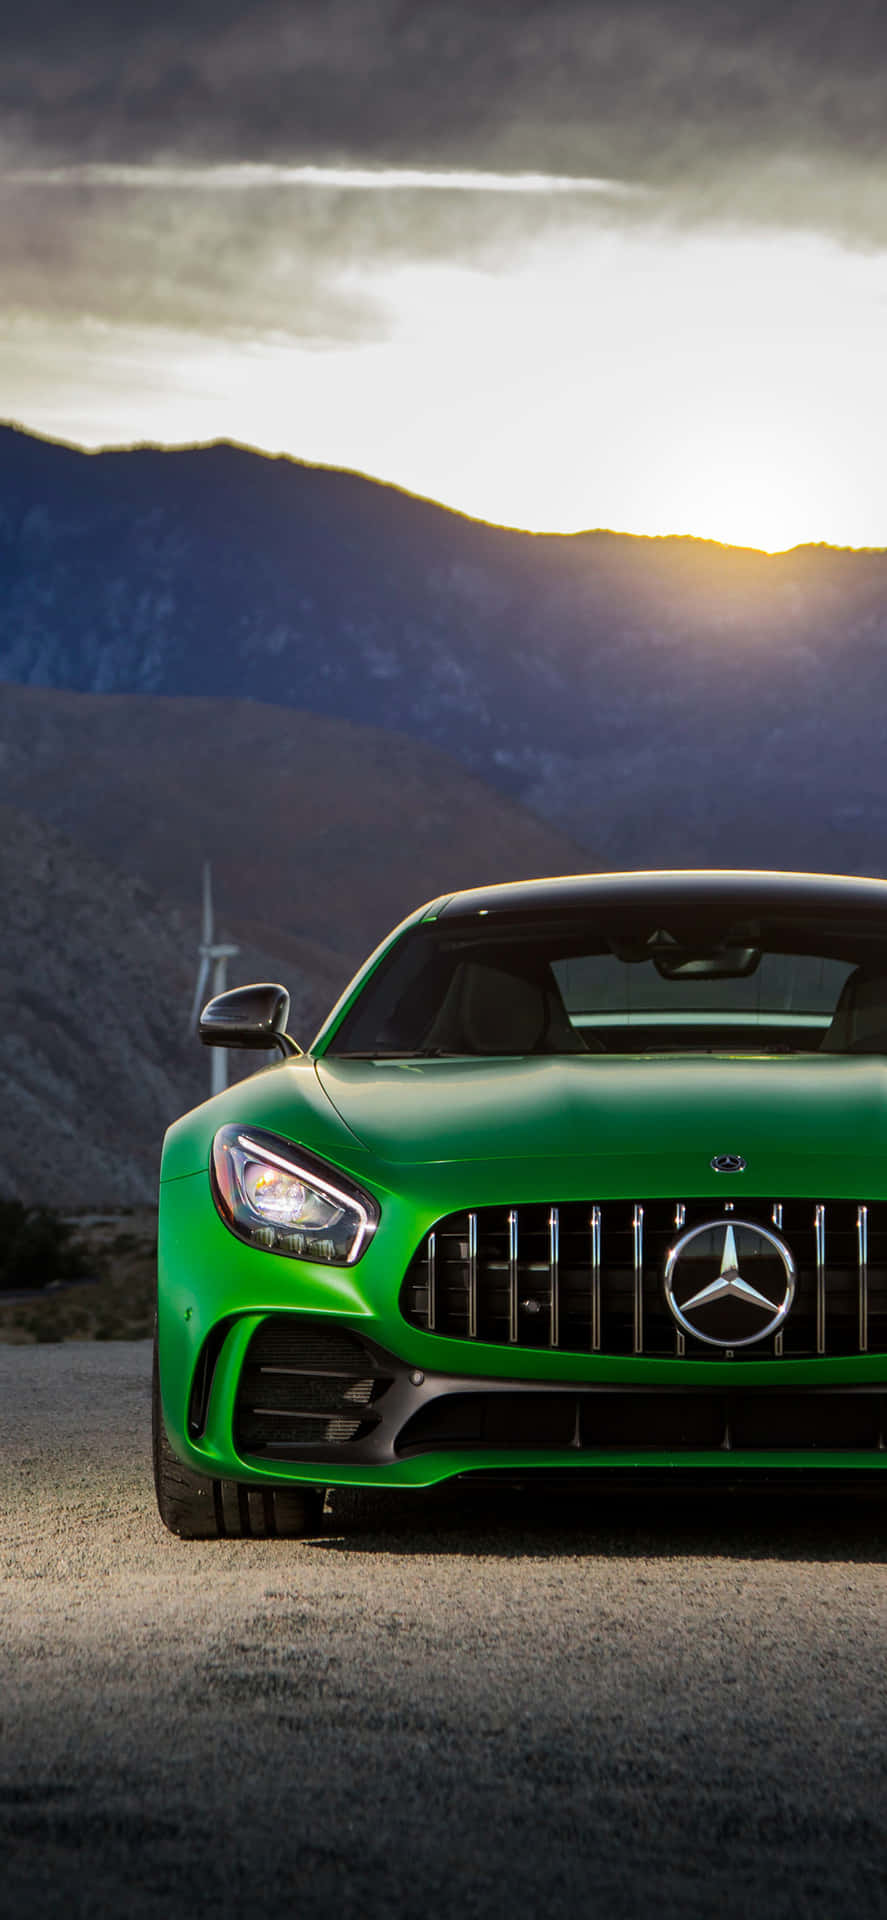 Iphone X Amg Gt-r Background Green Nose Of AMG GT